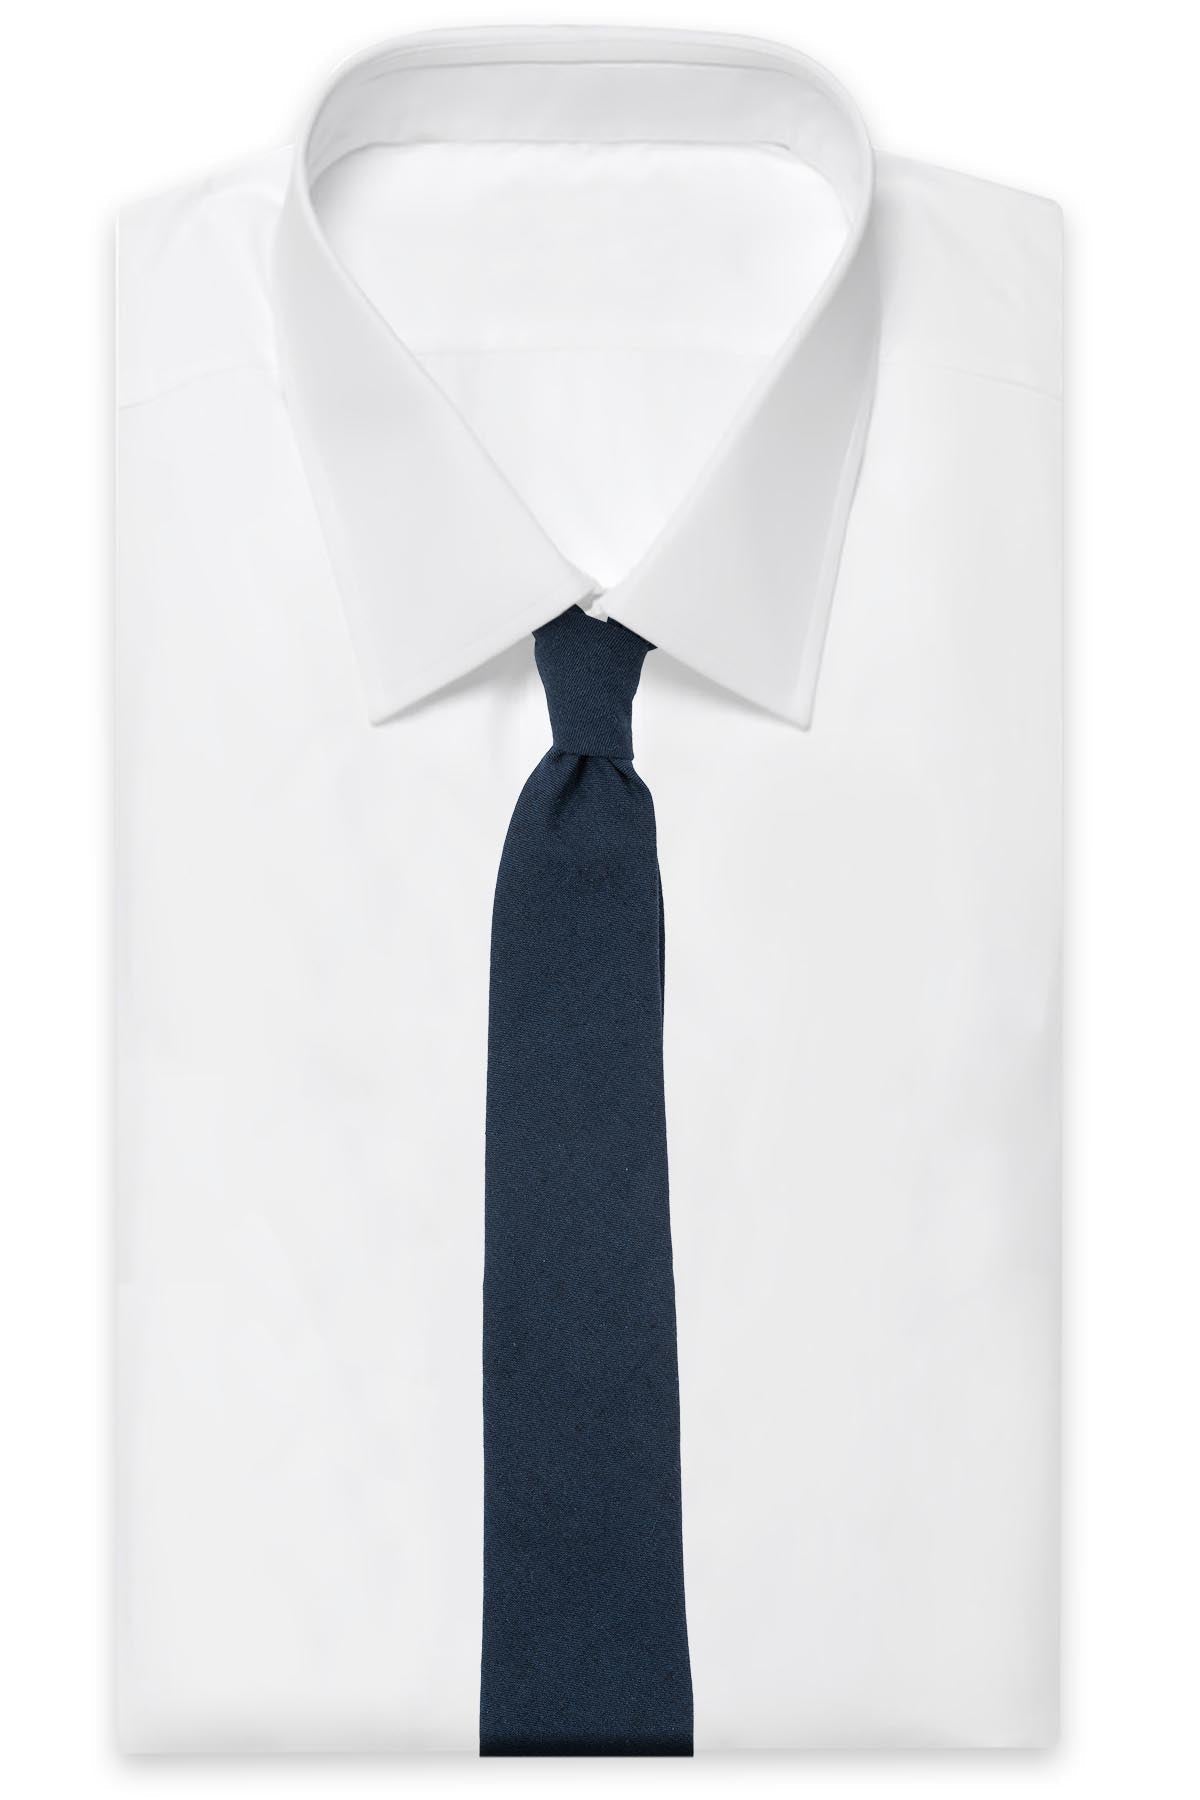 AN IVY Slips Solid Navy Cotton Tie